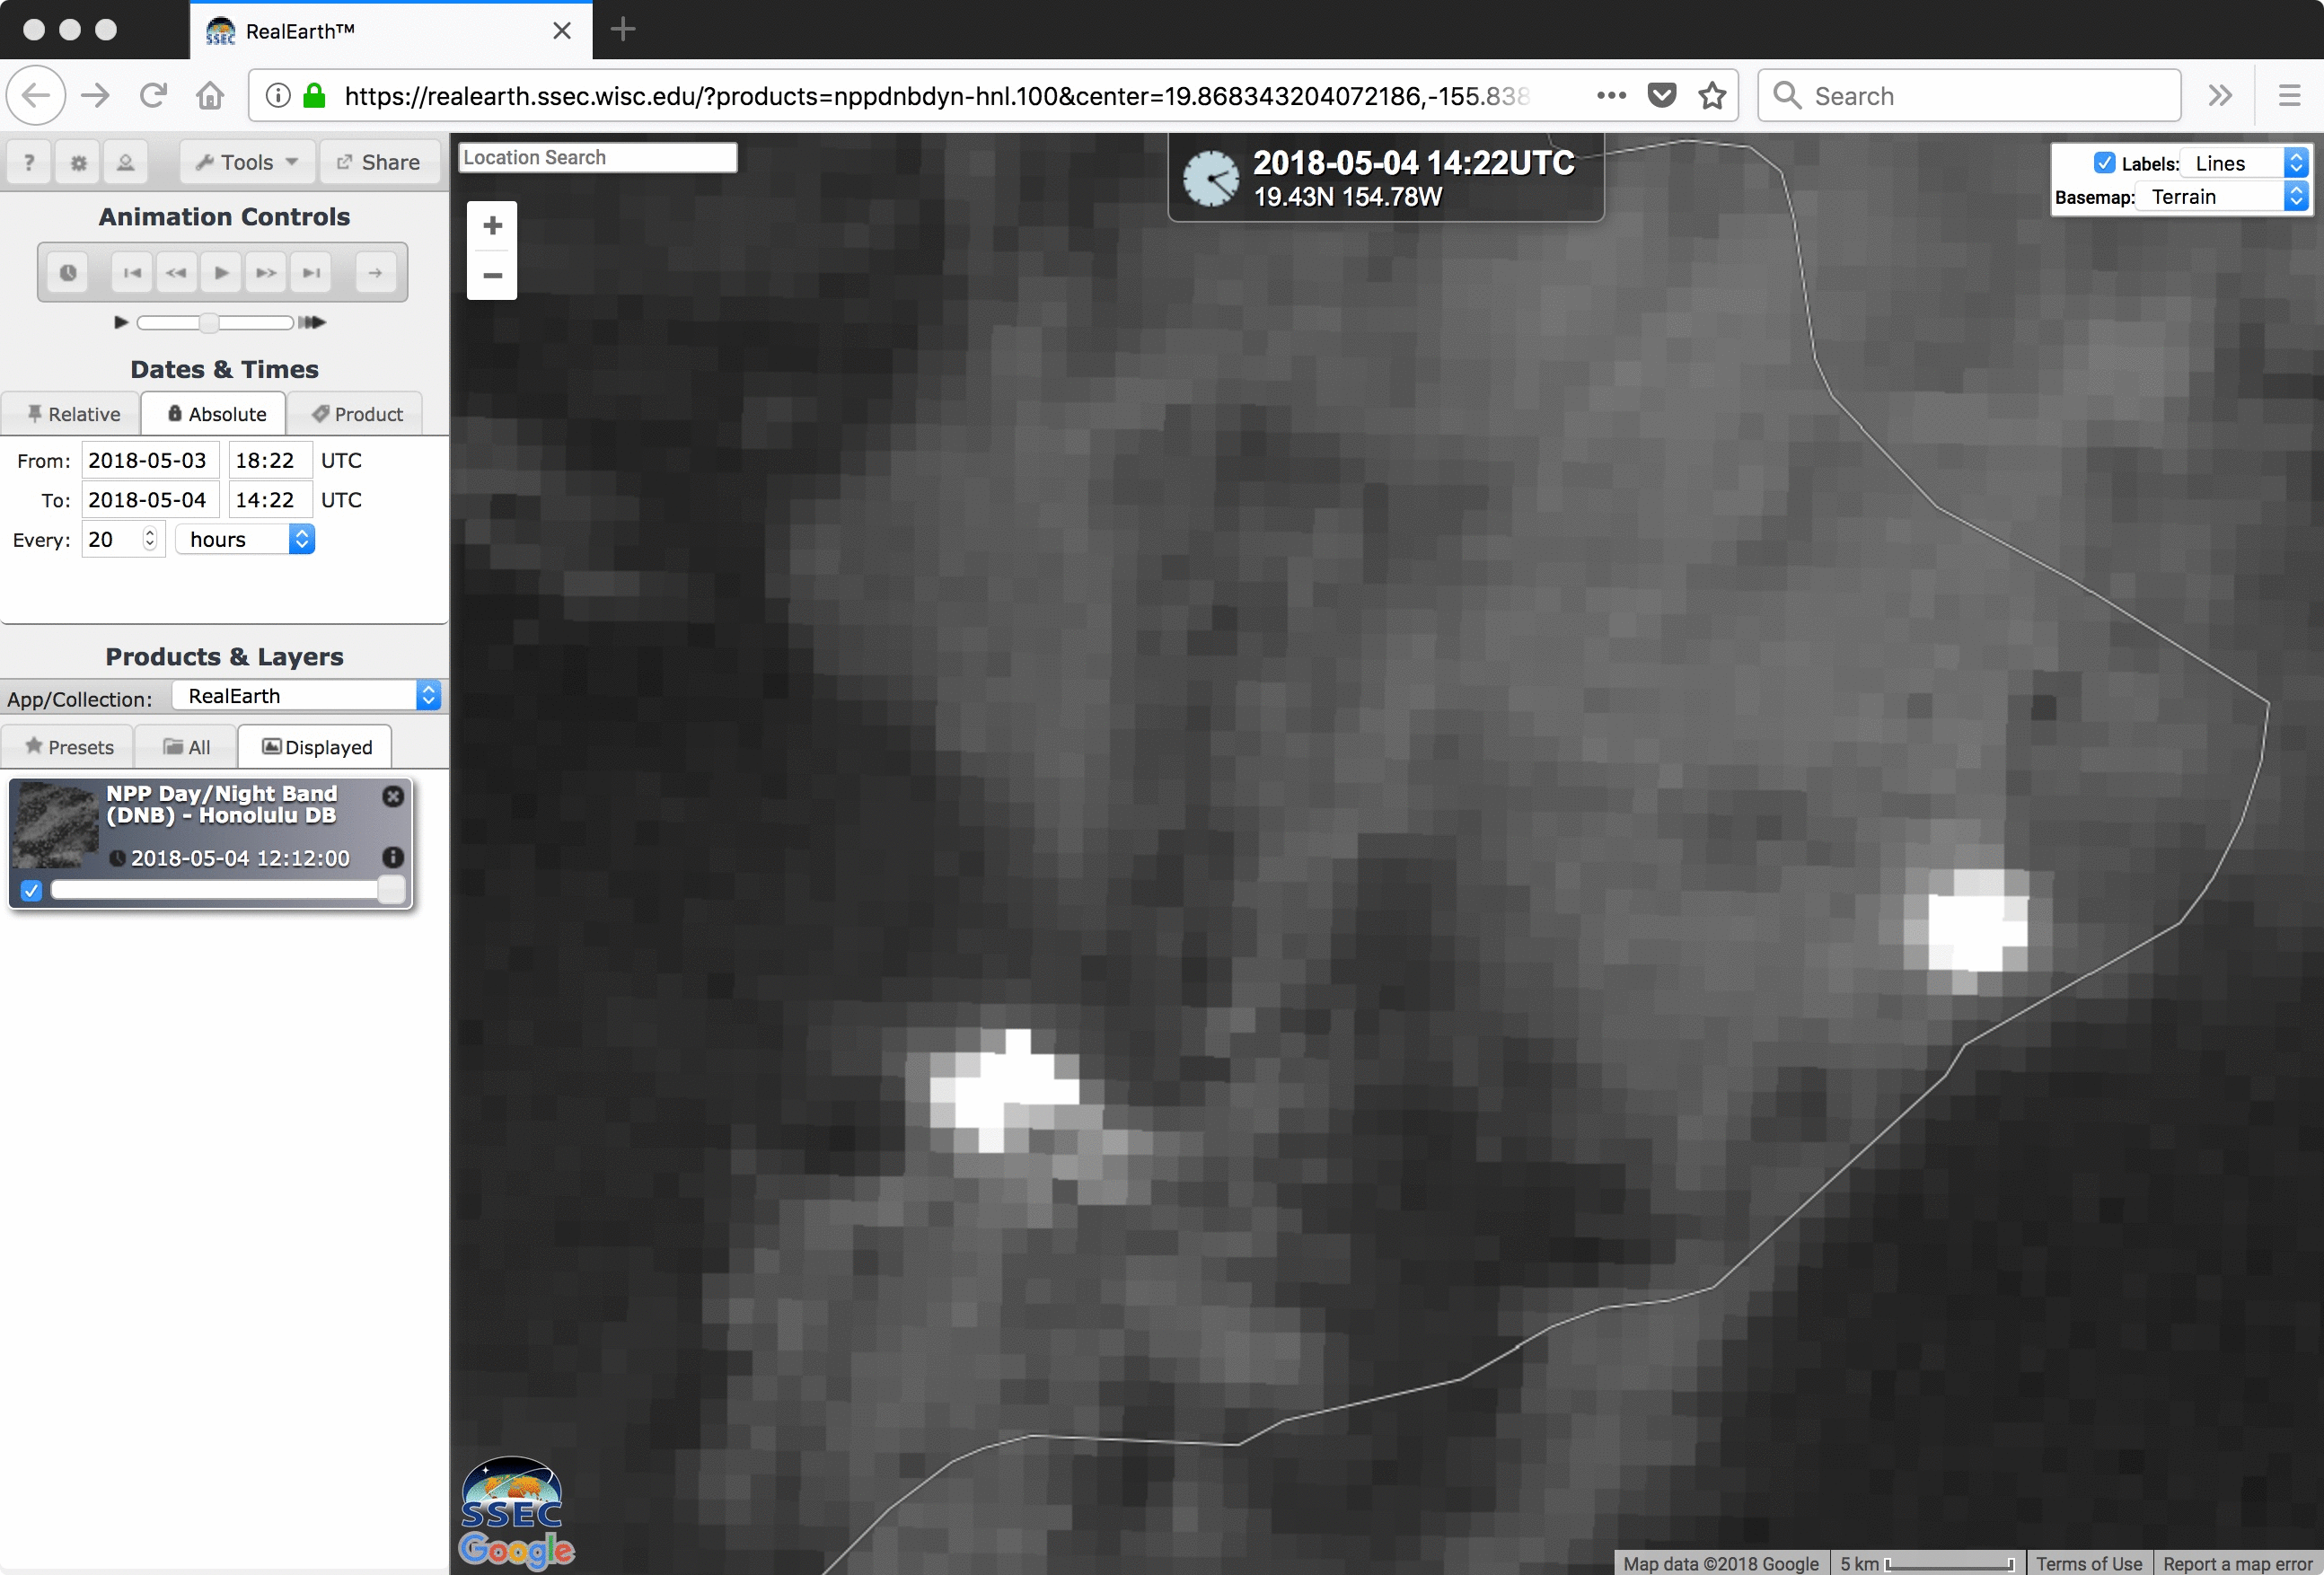 Suomi NPP VIIRS Day.Night Band (0.7 µm) images, with island boundary and Google Maps labels [click to enlarge]